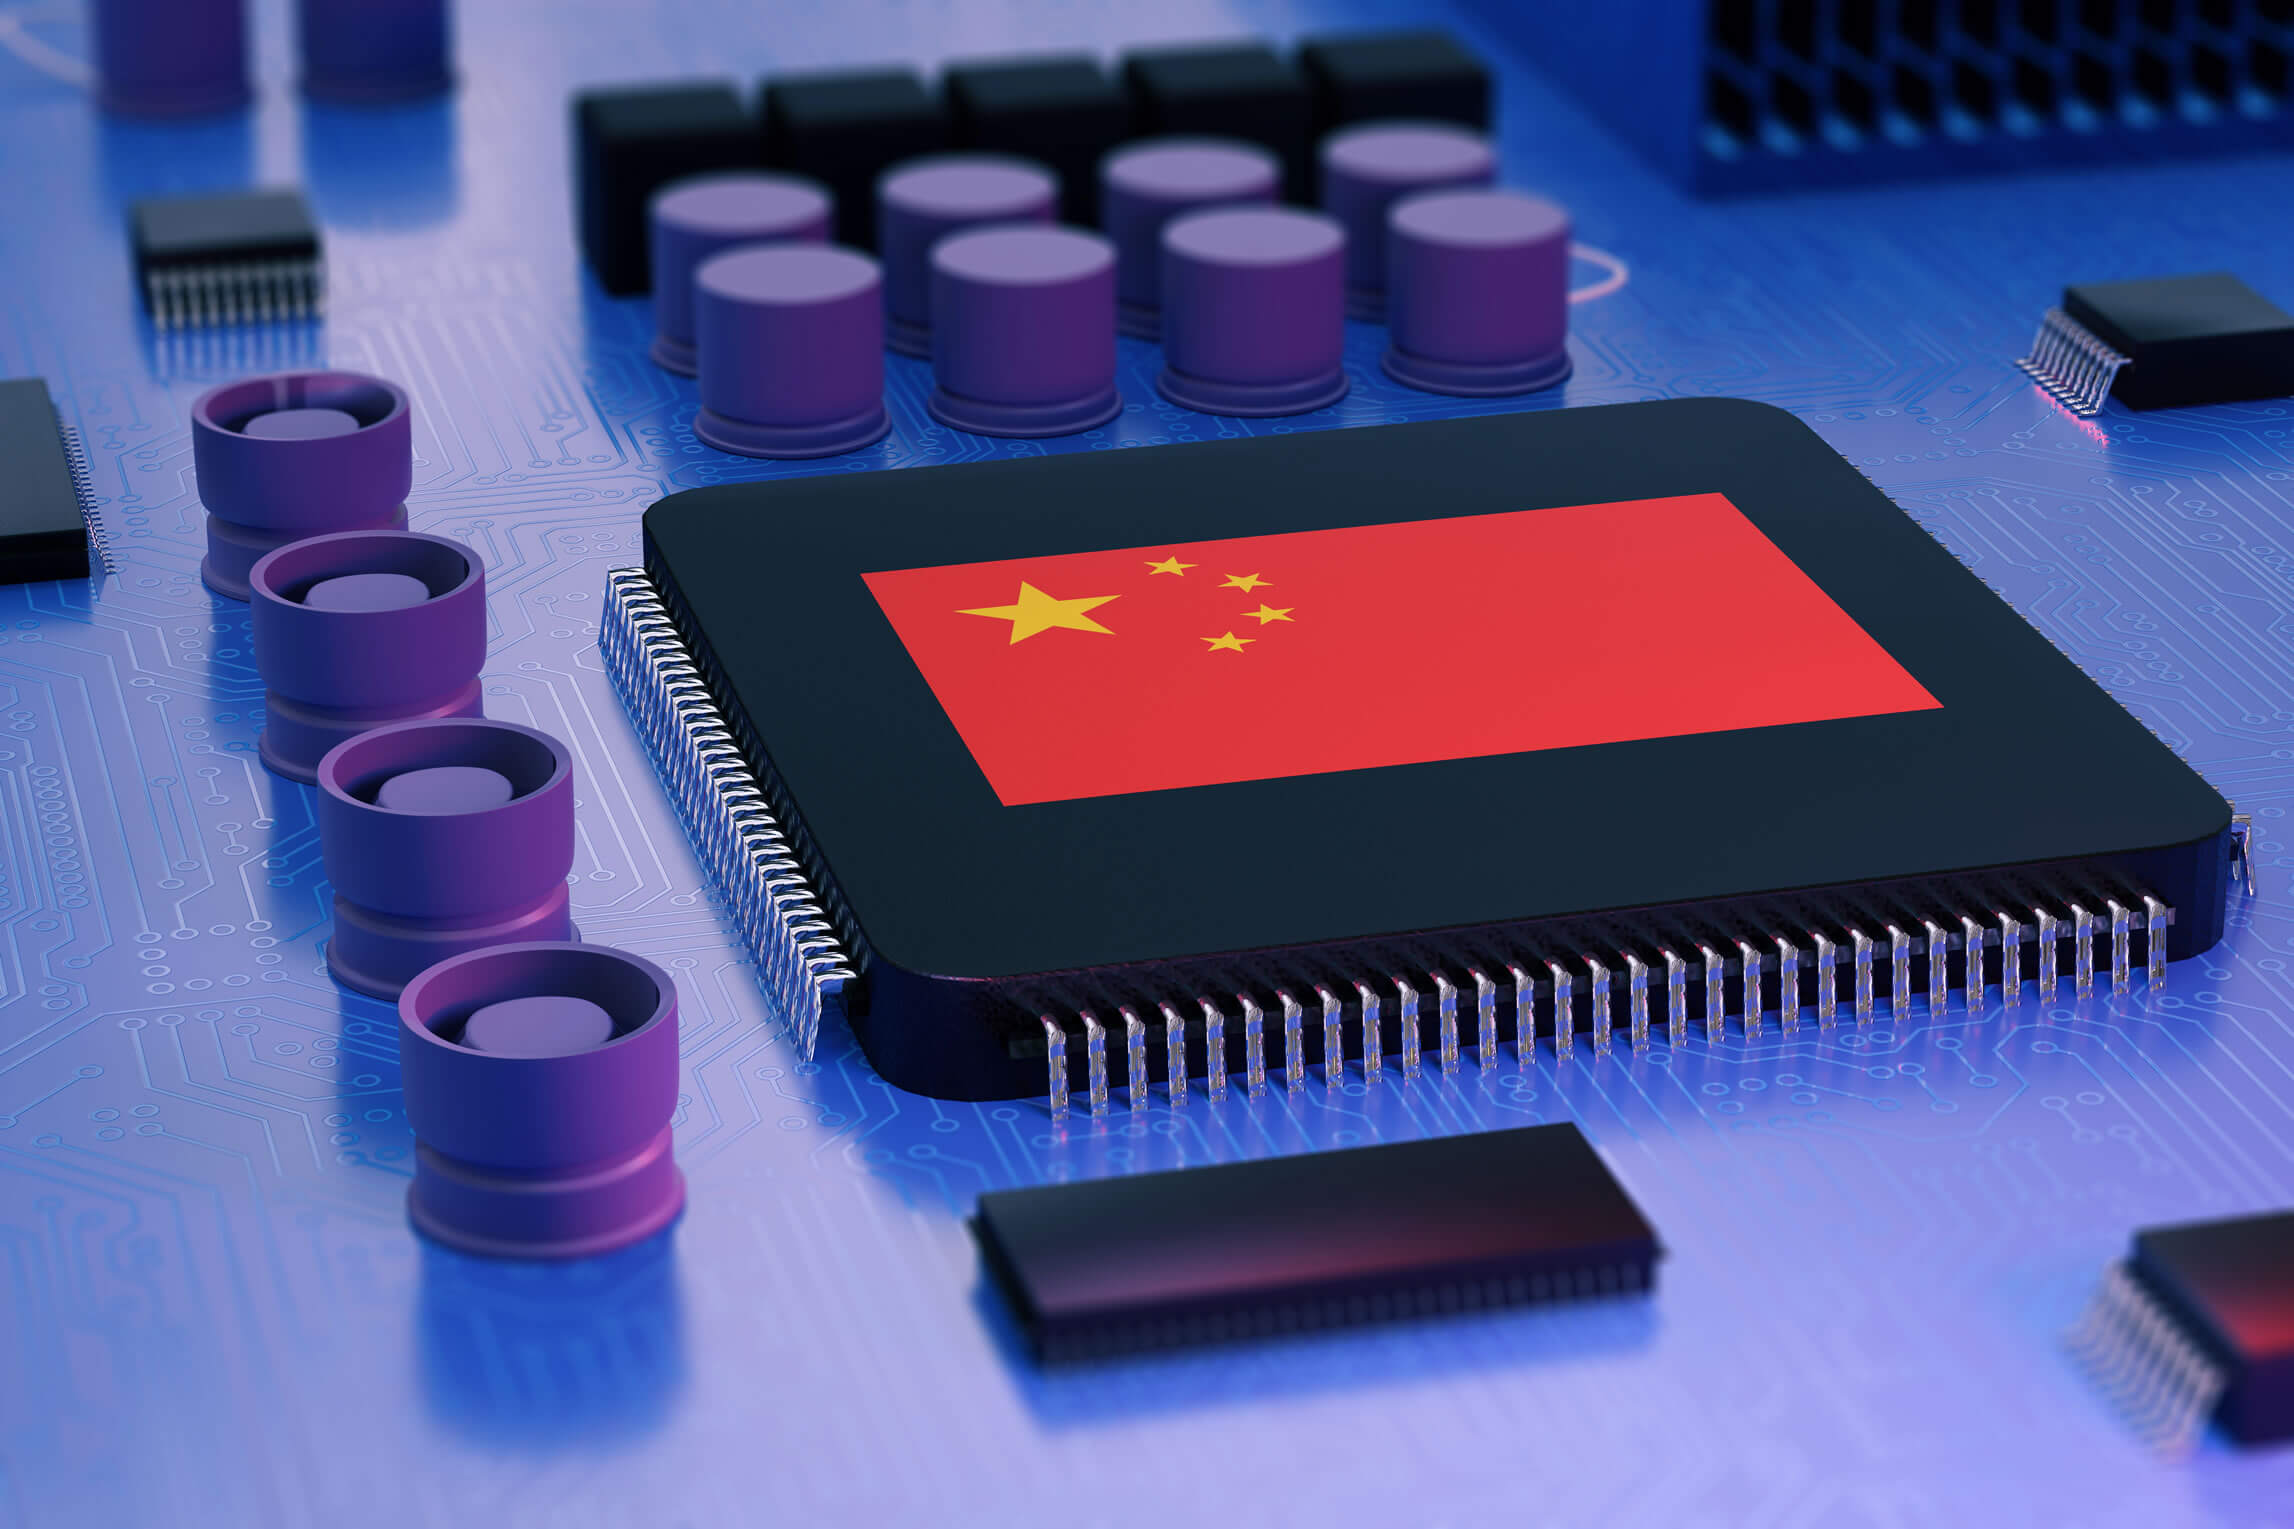 Latest Zhaoxin x86 CPUs tested: This is what China closing the gap looks like